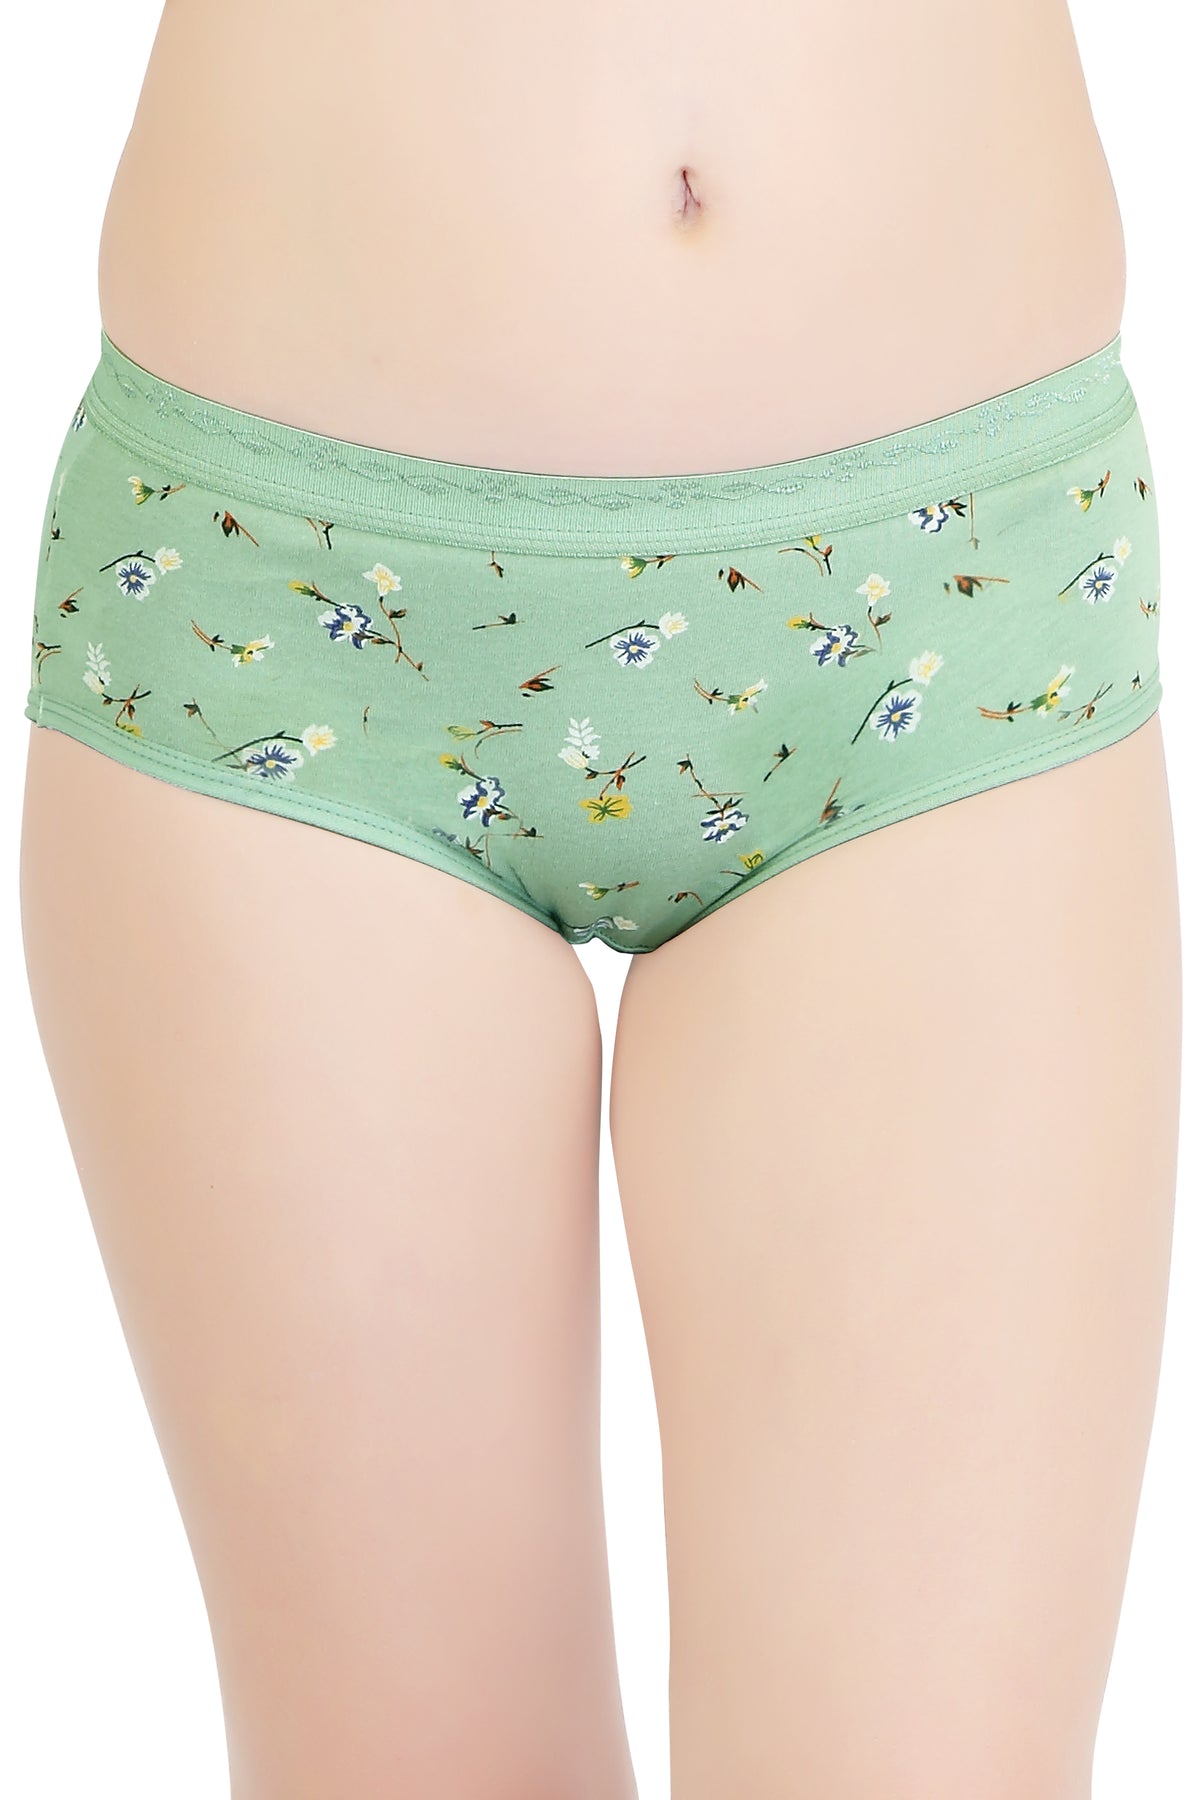 Teen Age/ Kids Girl Printed Cotton Comfortable Mid-Waist Hipster Panty with Stretchable Soft Elastic